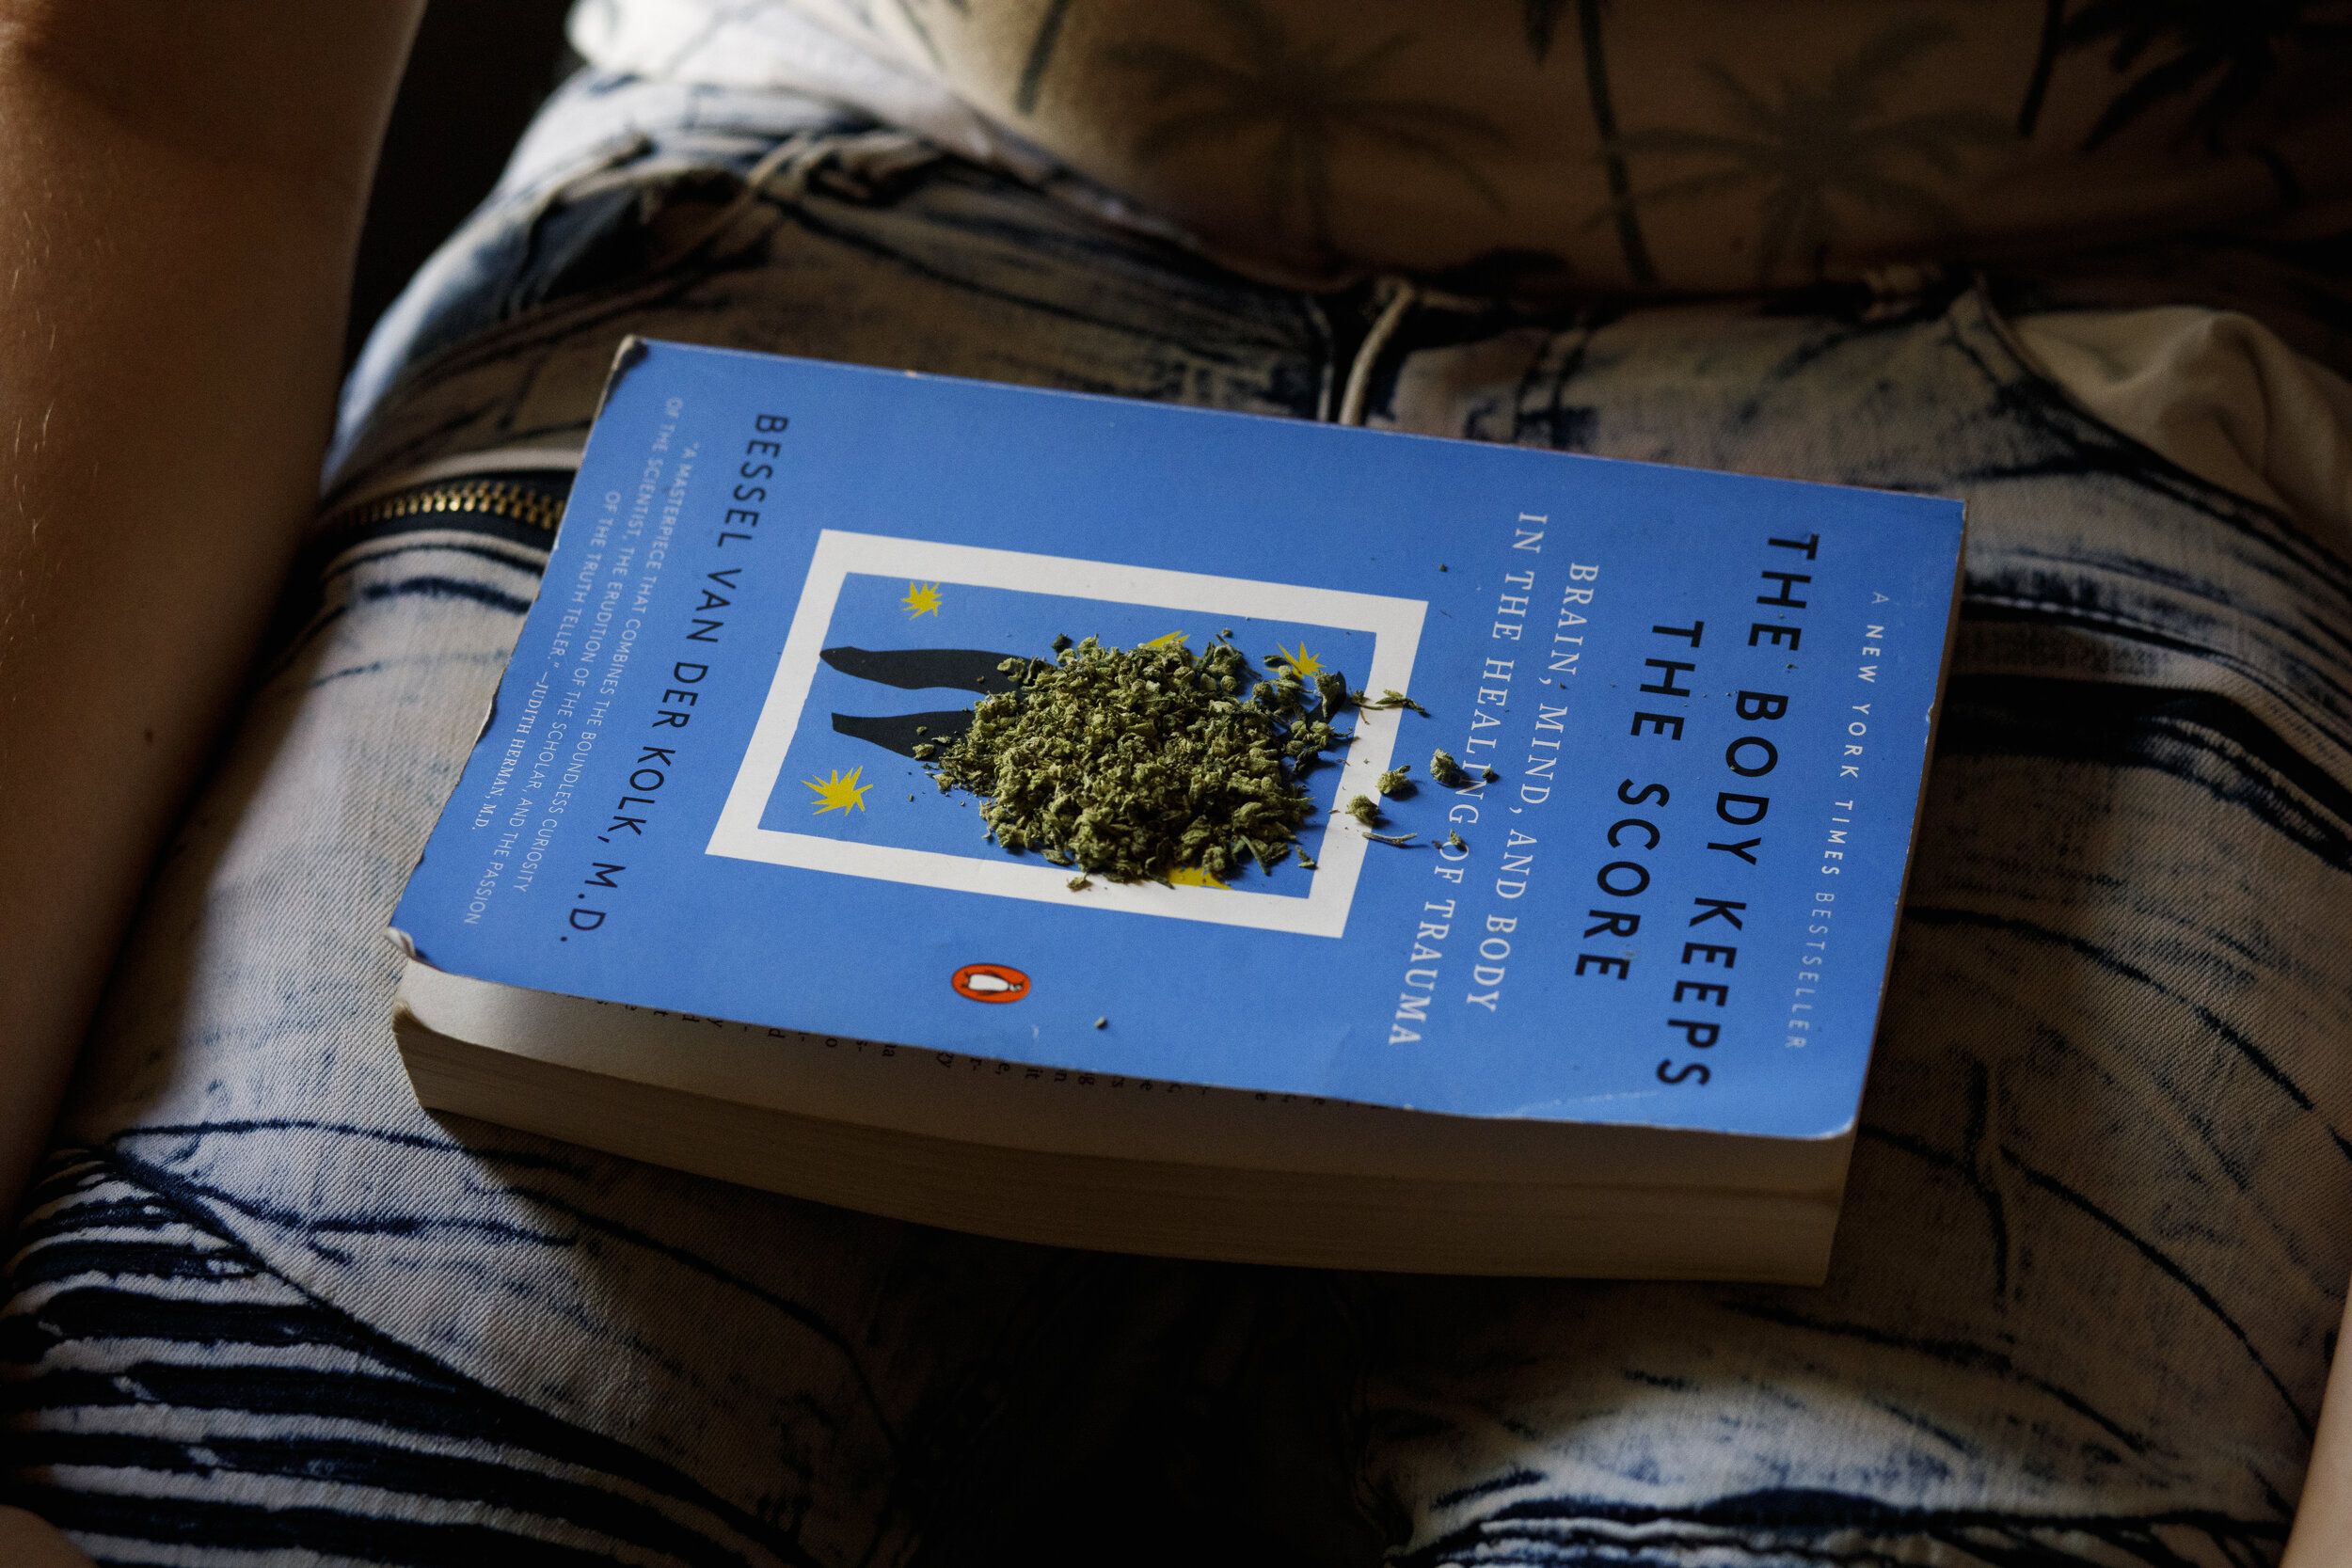  Reuben Kellar rolls a joint on his favorite psychology book, The Body Keeps the Score, in Ben’s living room on March 26, 2021. “The most fascinating thing is brains, like how they work… it's crazy like how minds work like psychology is going to be m